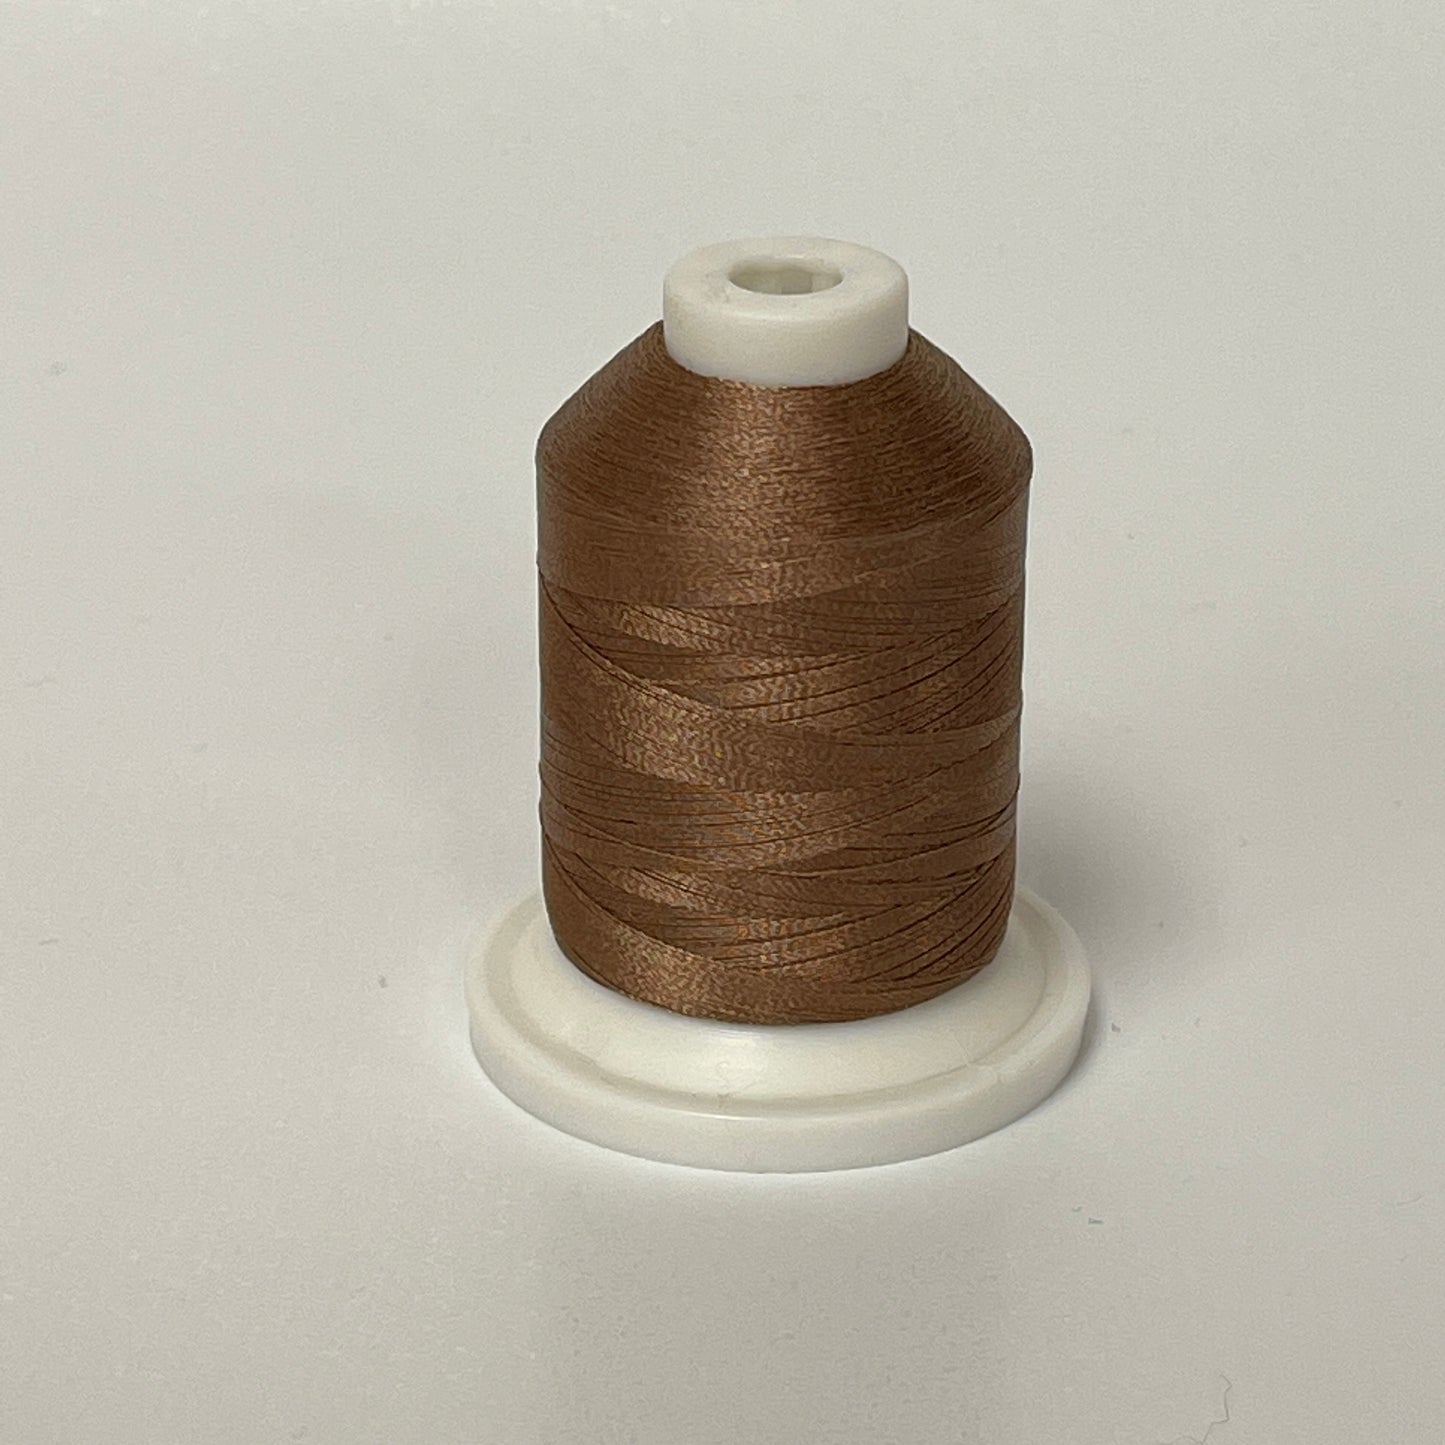 Brother Pacesetter Embroidery Thread - Neutrals +Neons